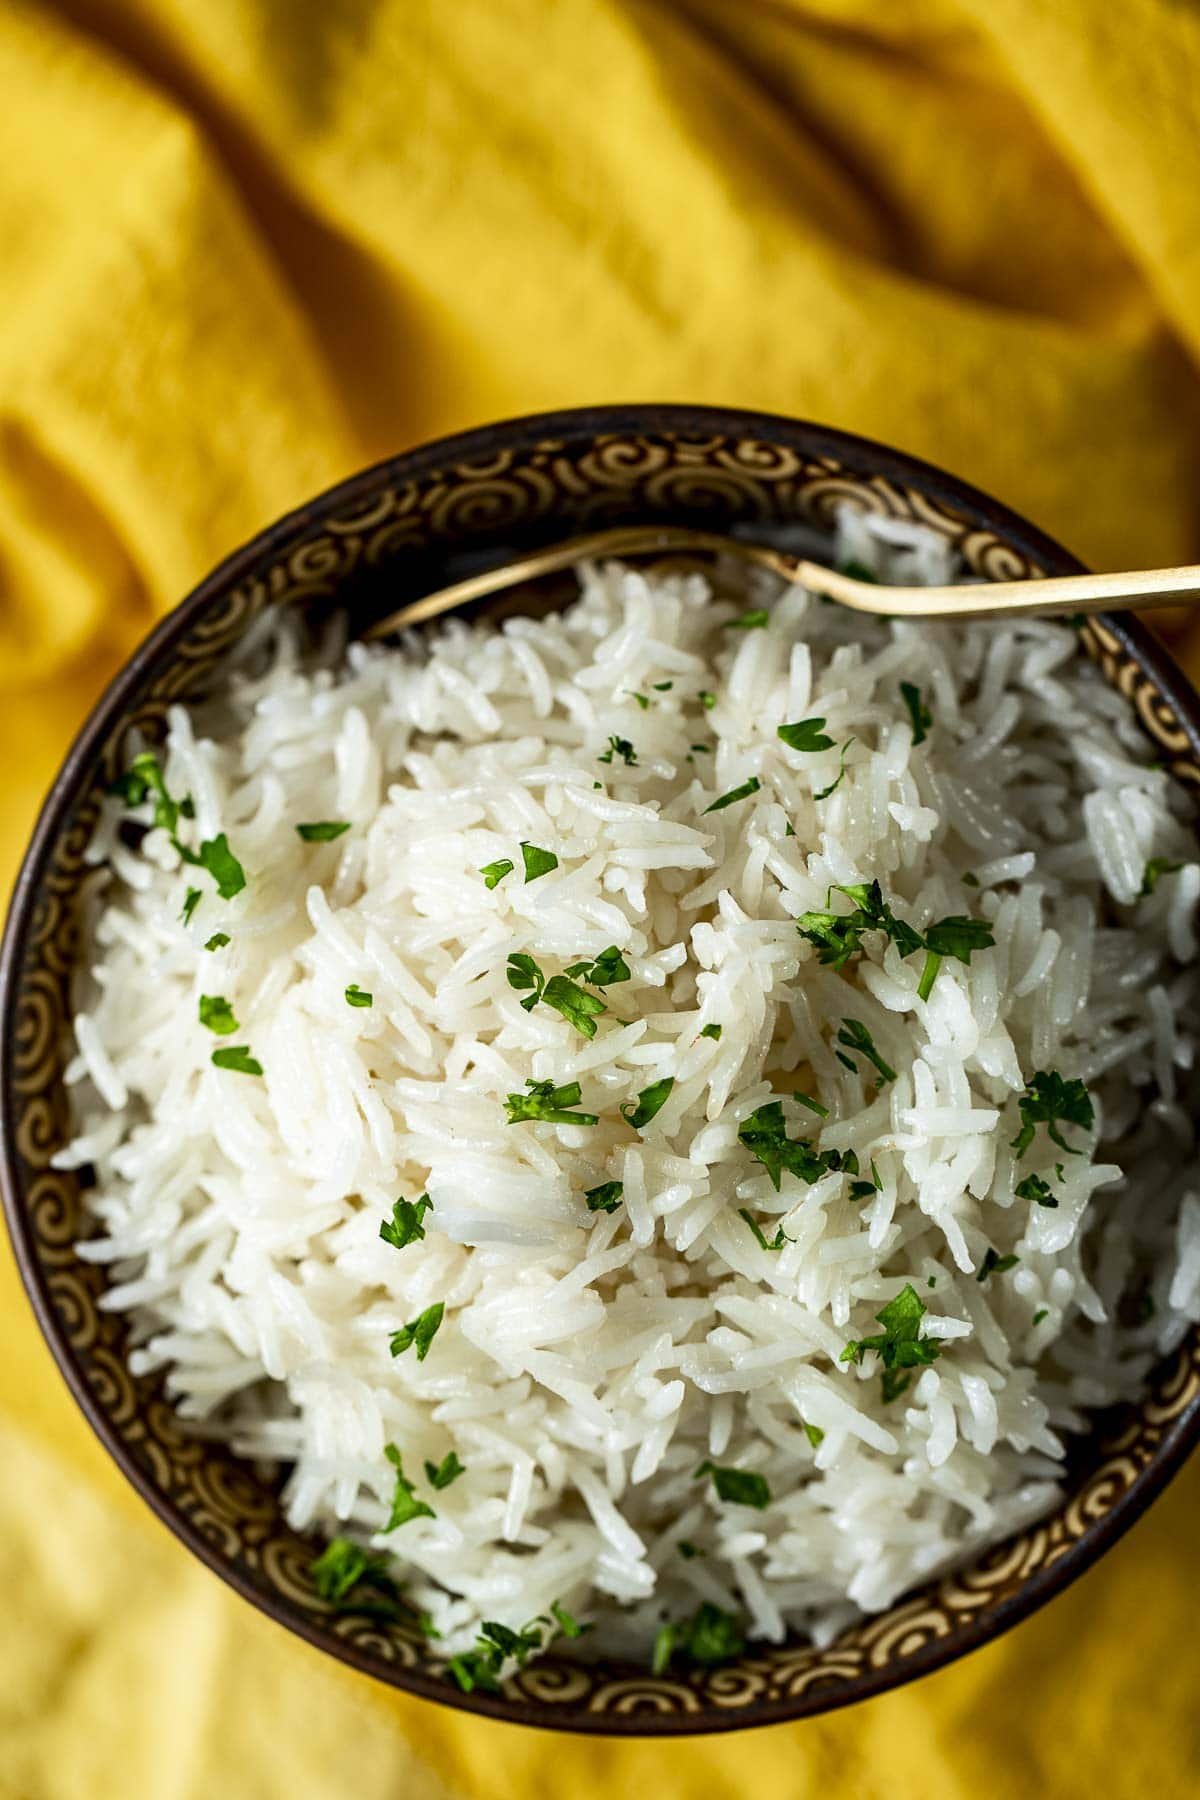 Overhead view of basmati rice in a bowl and topped with chopped fresh herbs.